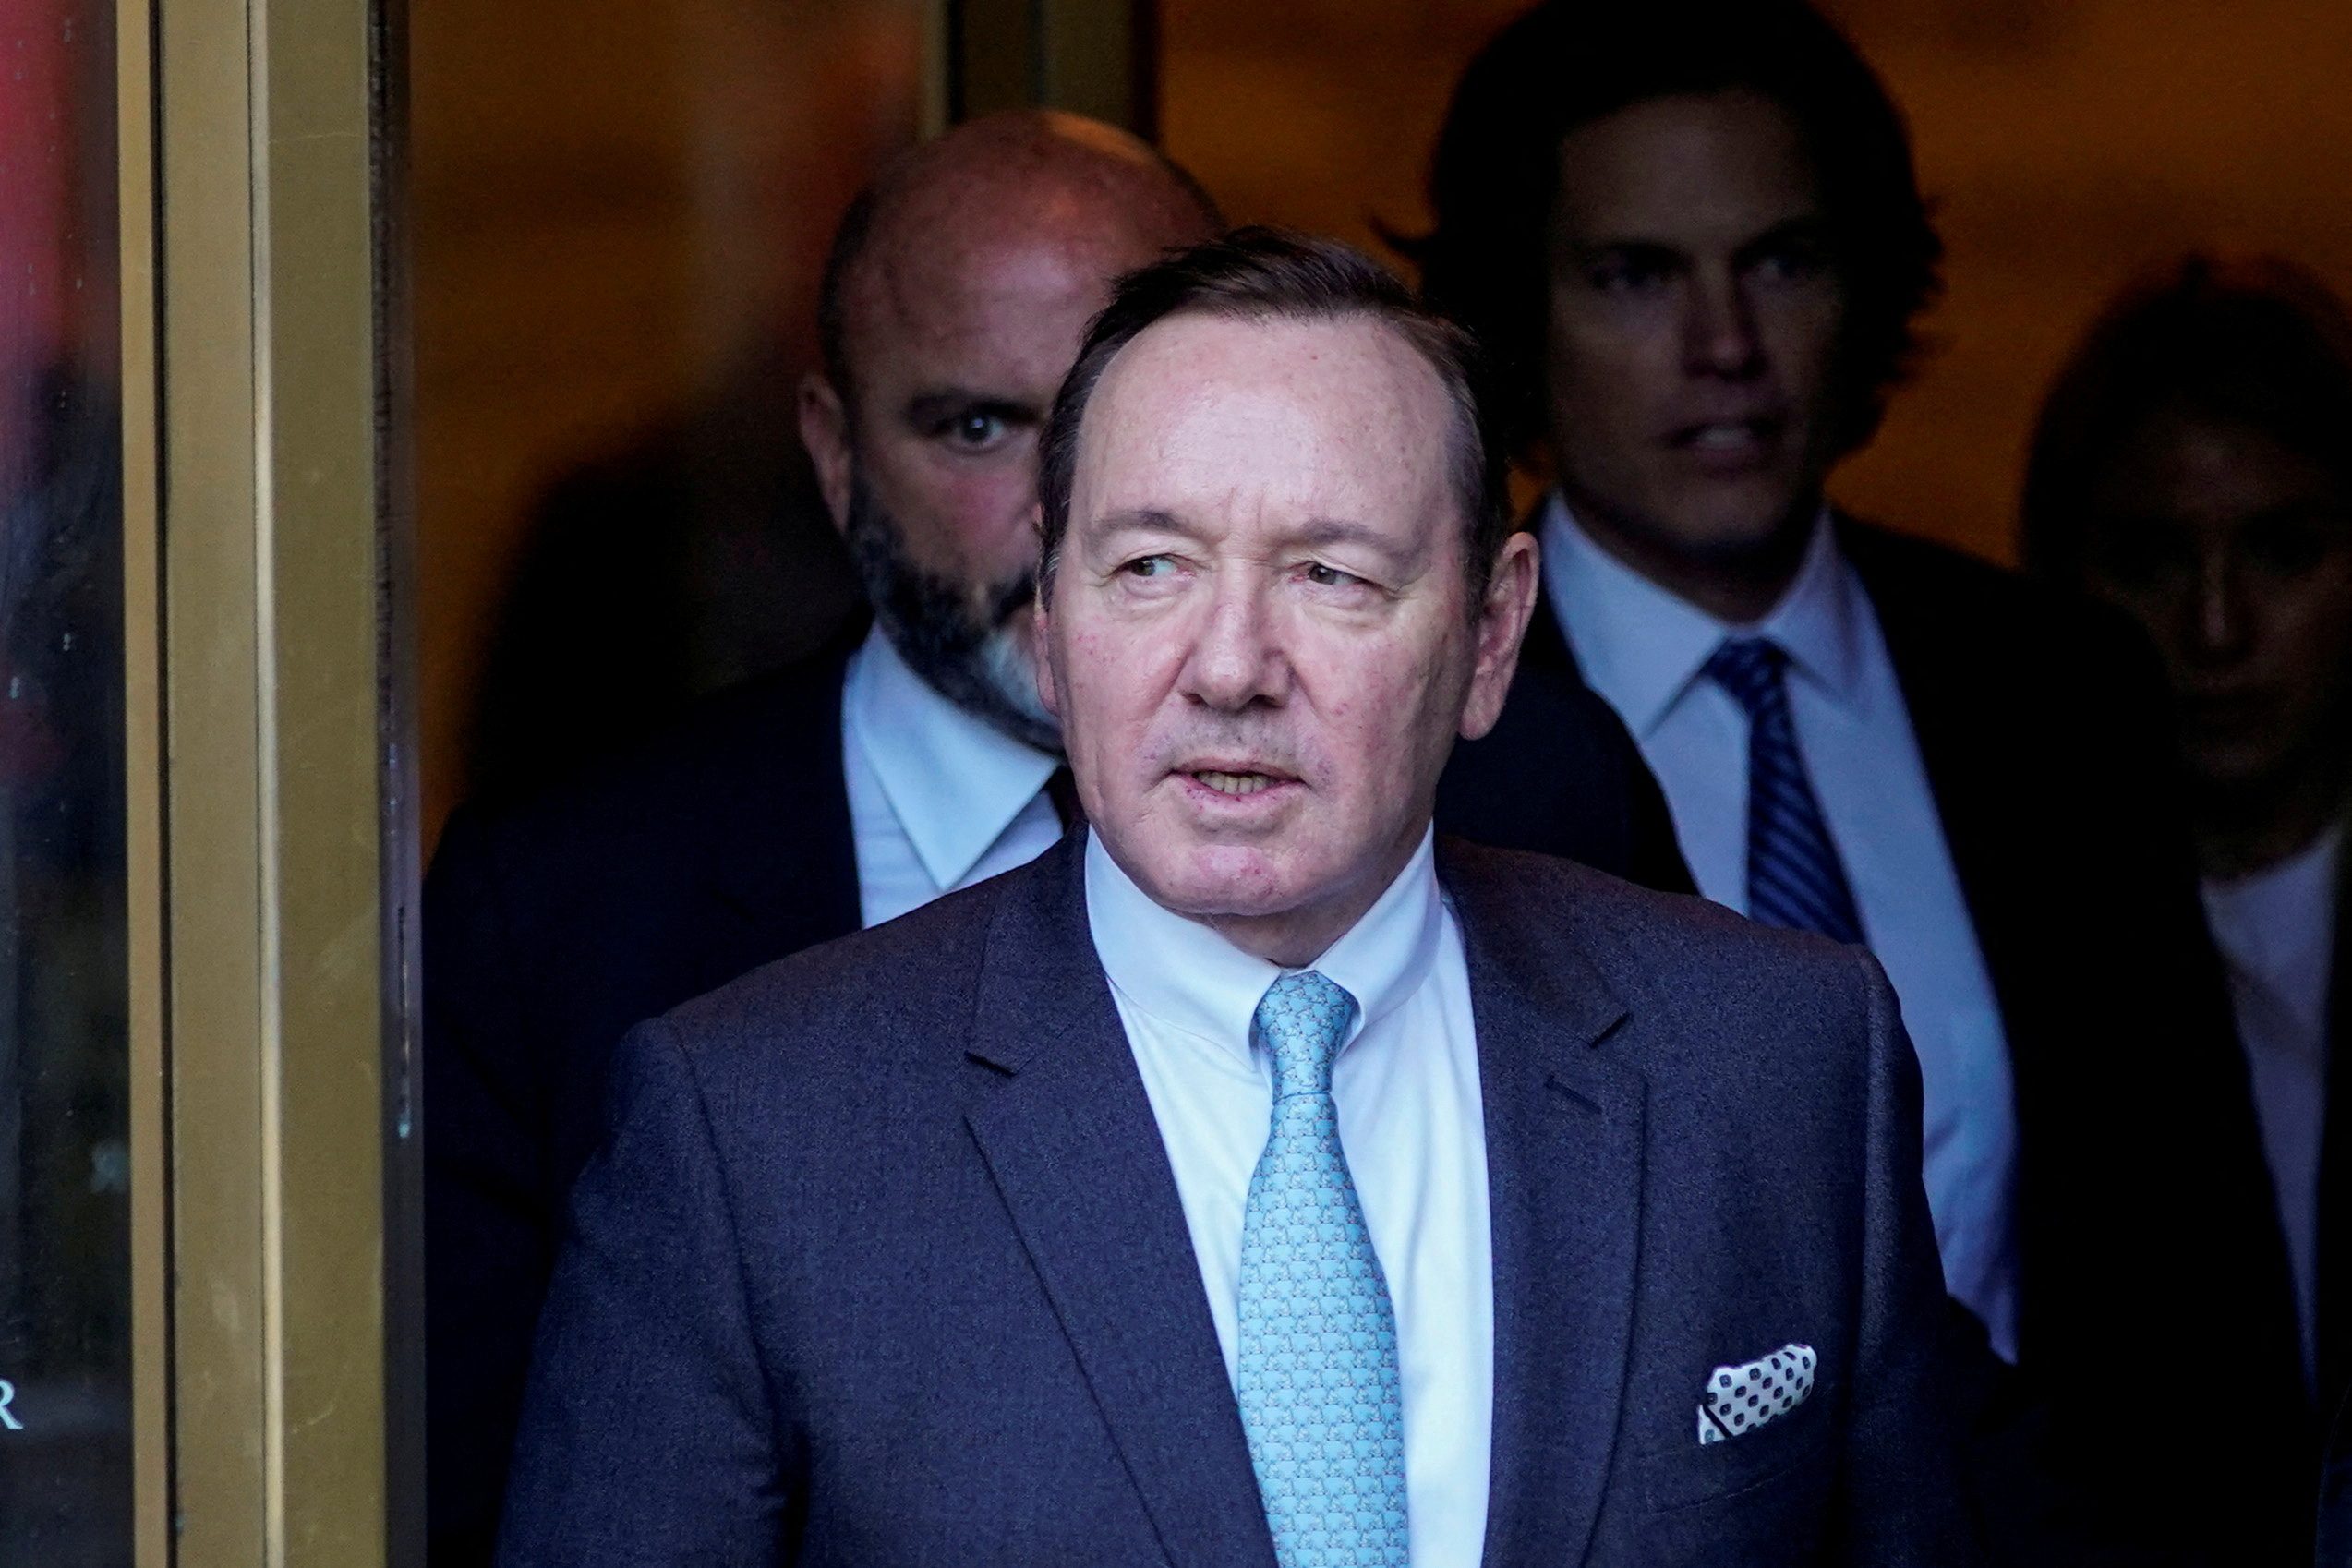 Kevin Spacey at sexual misconduct trial trades dueling accounts with accuser